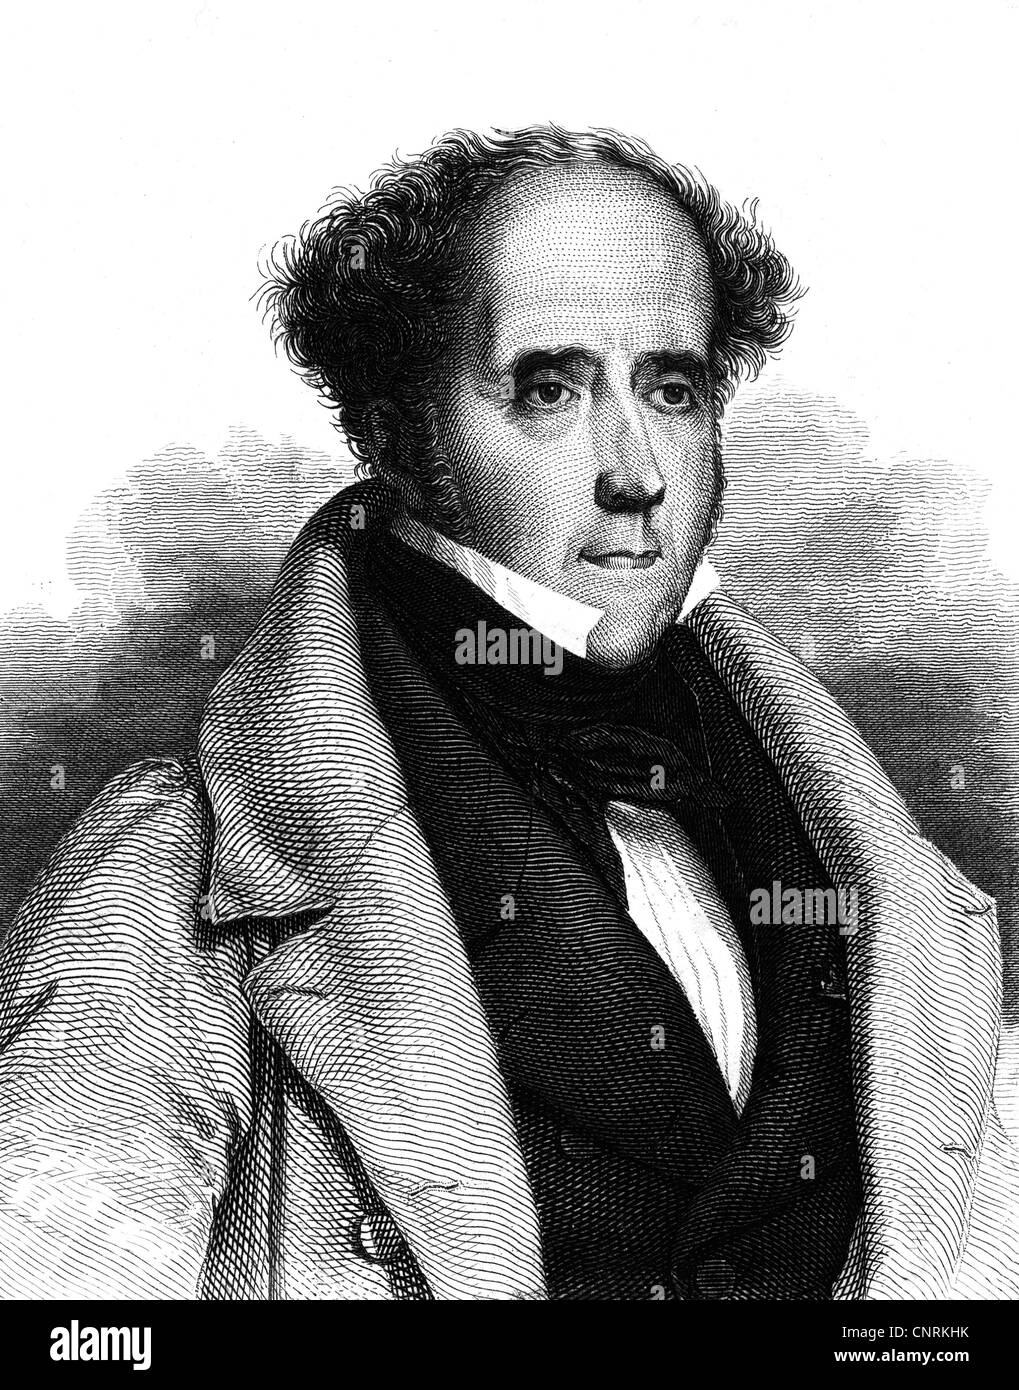 Chateaubriand, Francois Rene de, 4.9.1768 - 4.7.1848, French author / writer and politician, portrait, steel engraving, 19th century, Artist's Copyright has not to be cleared Stock Photo